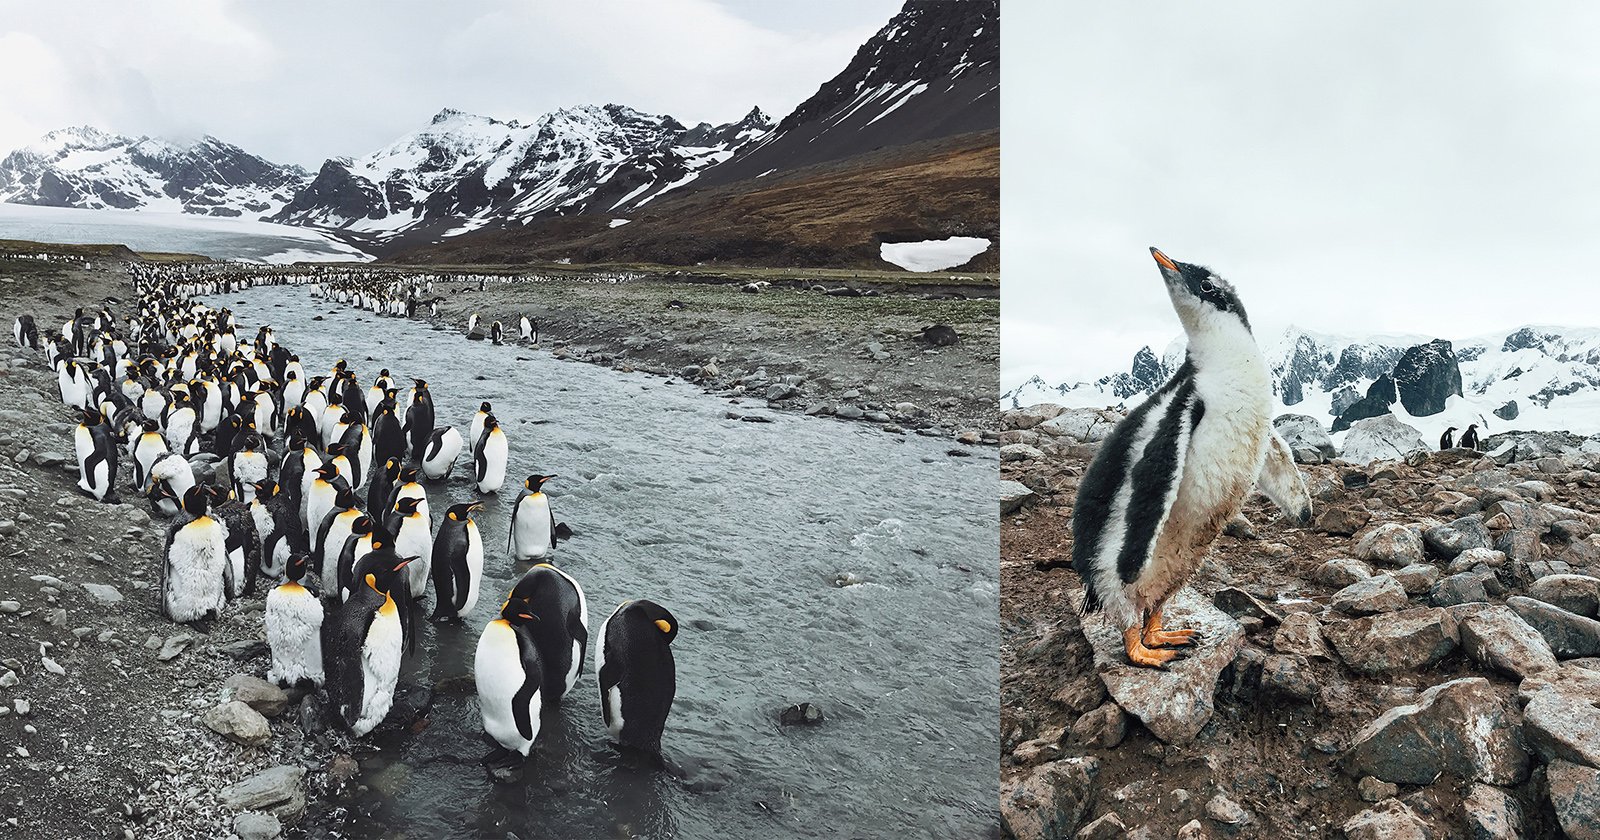 Shooting with the iPhone in Antarctica